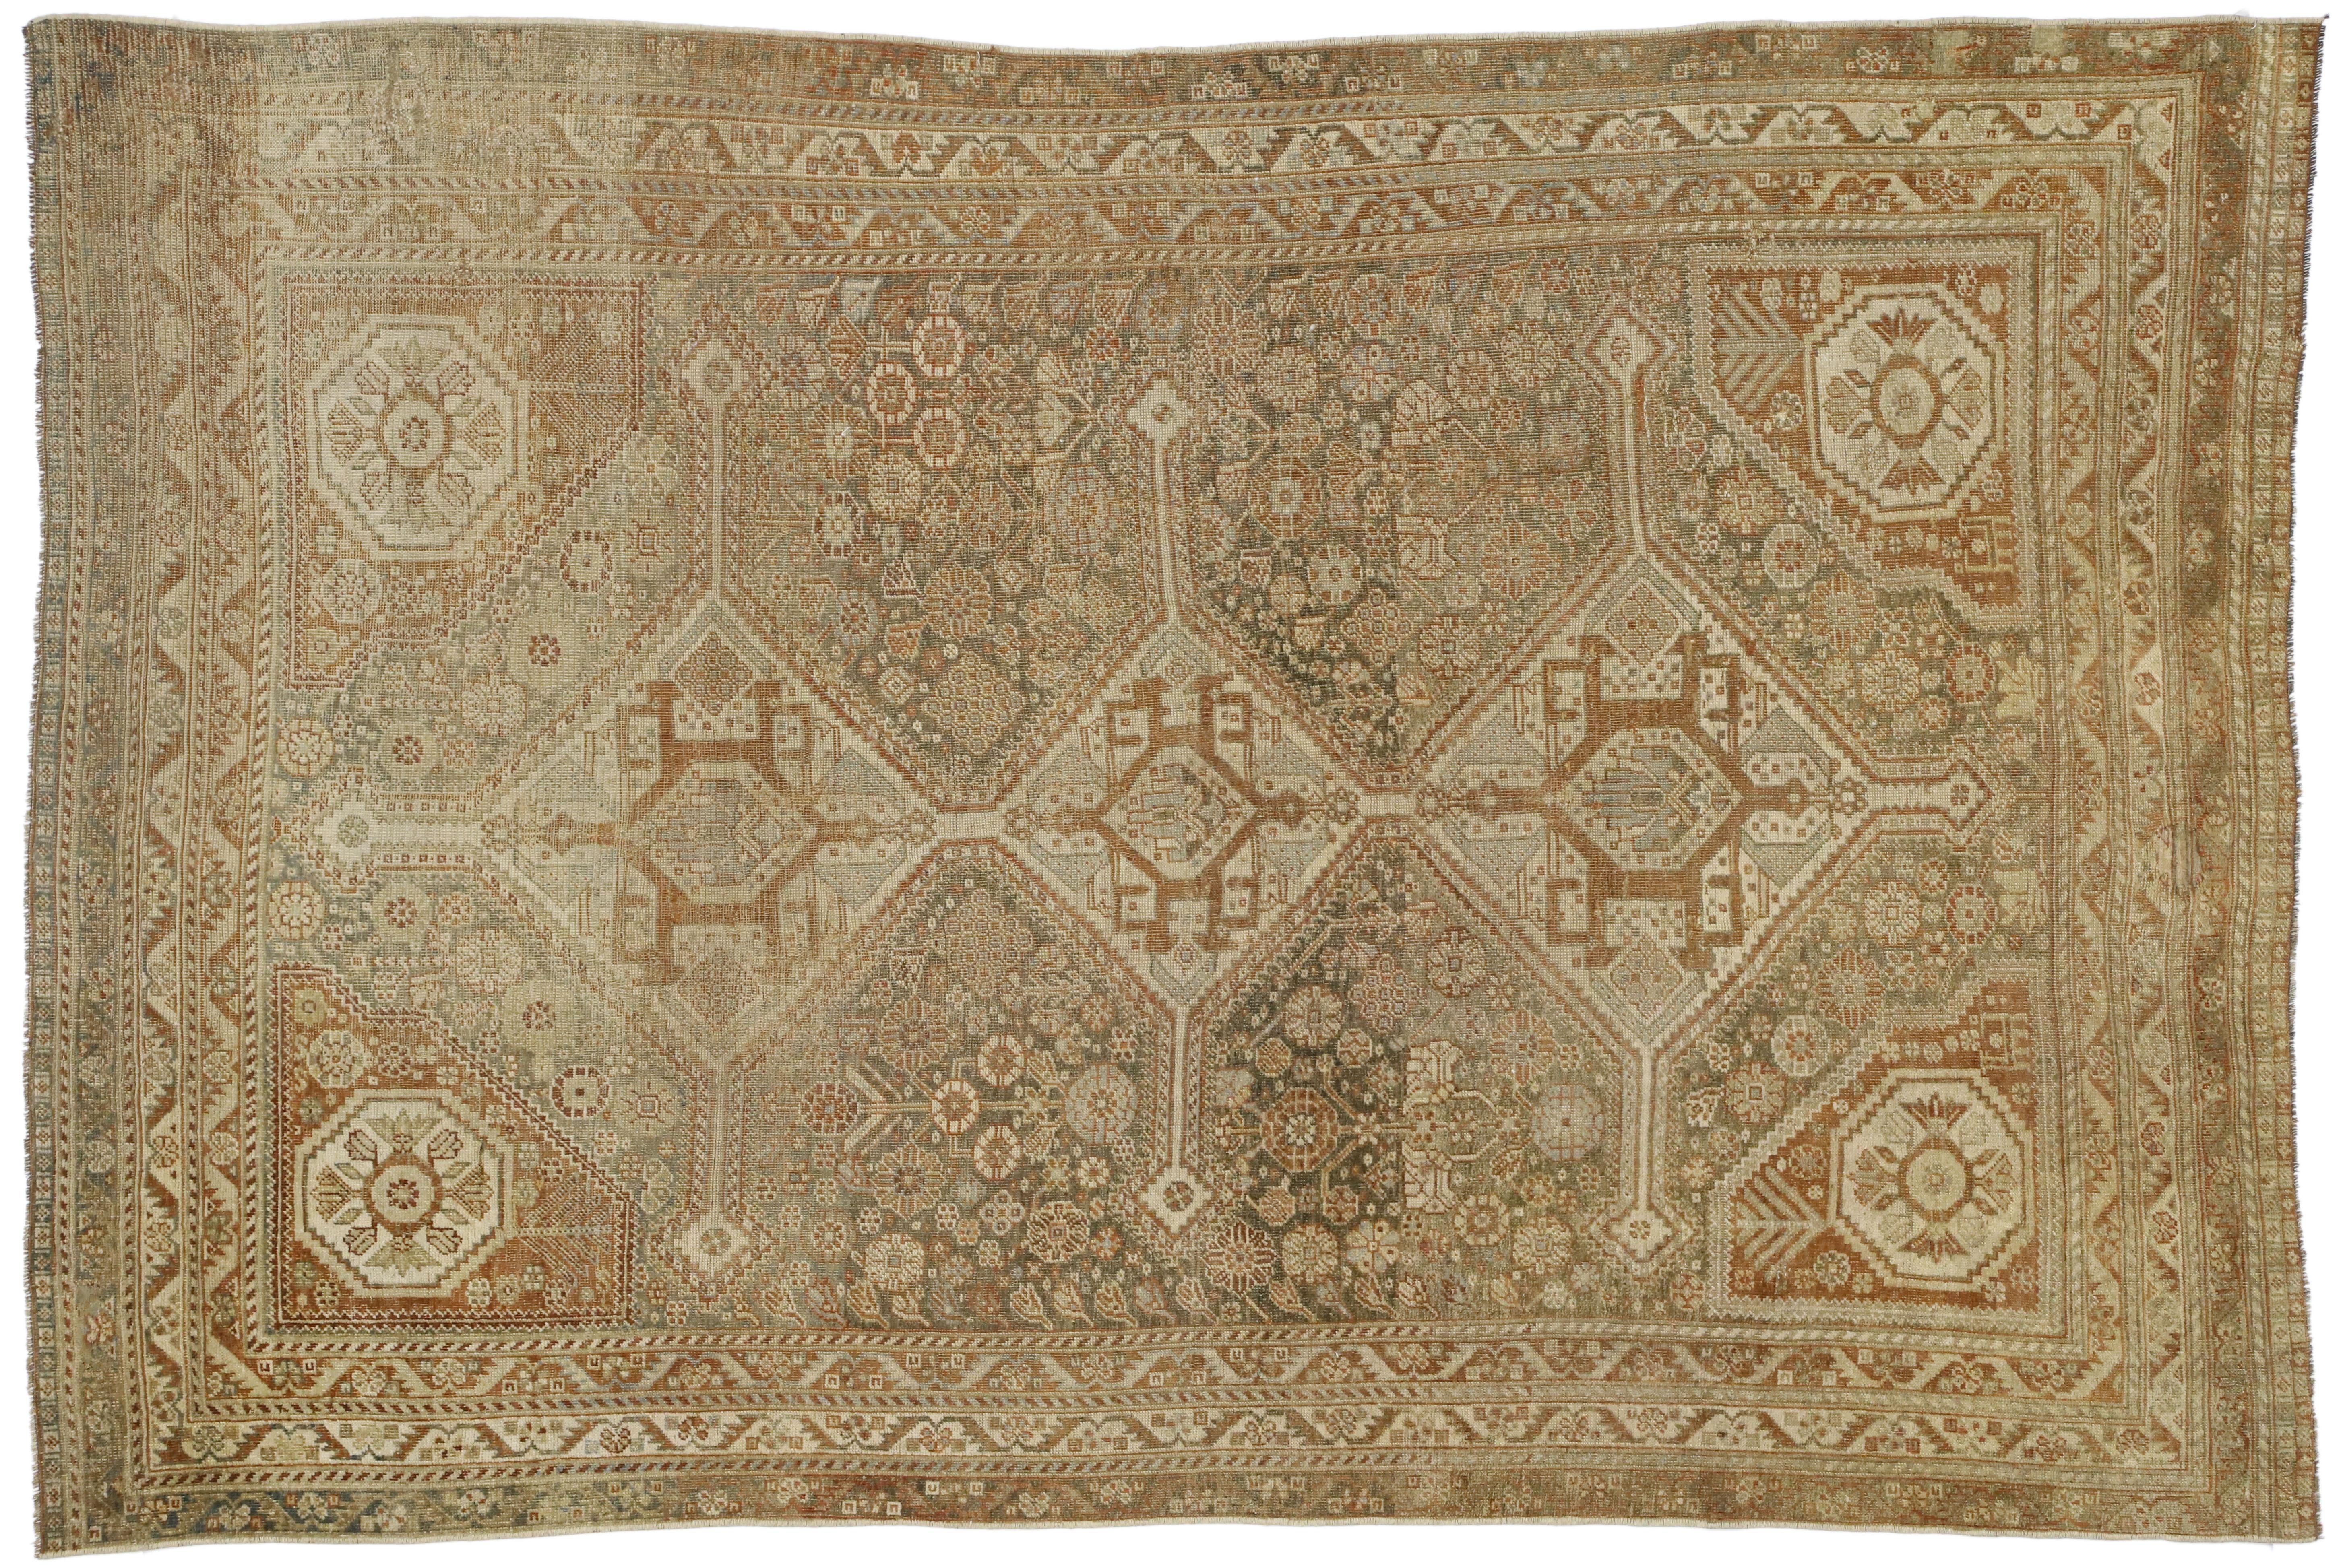 Distressed Antique Persian Shiraz Rug with American Craftsman Rustic Style For Sale 3